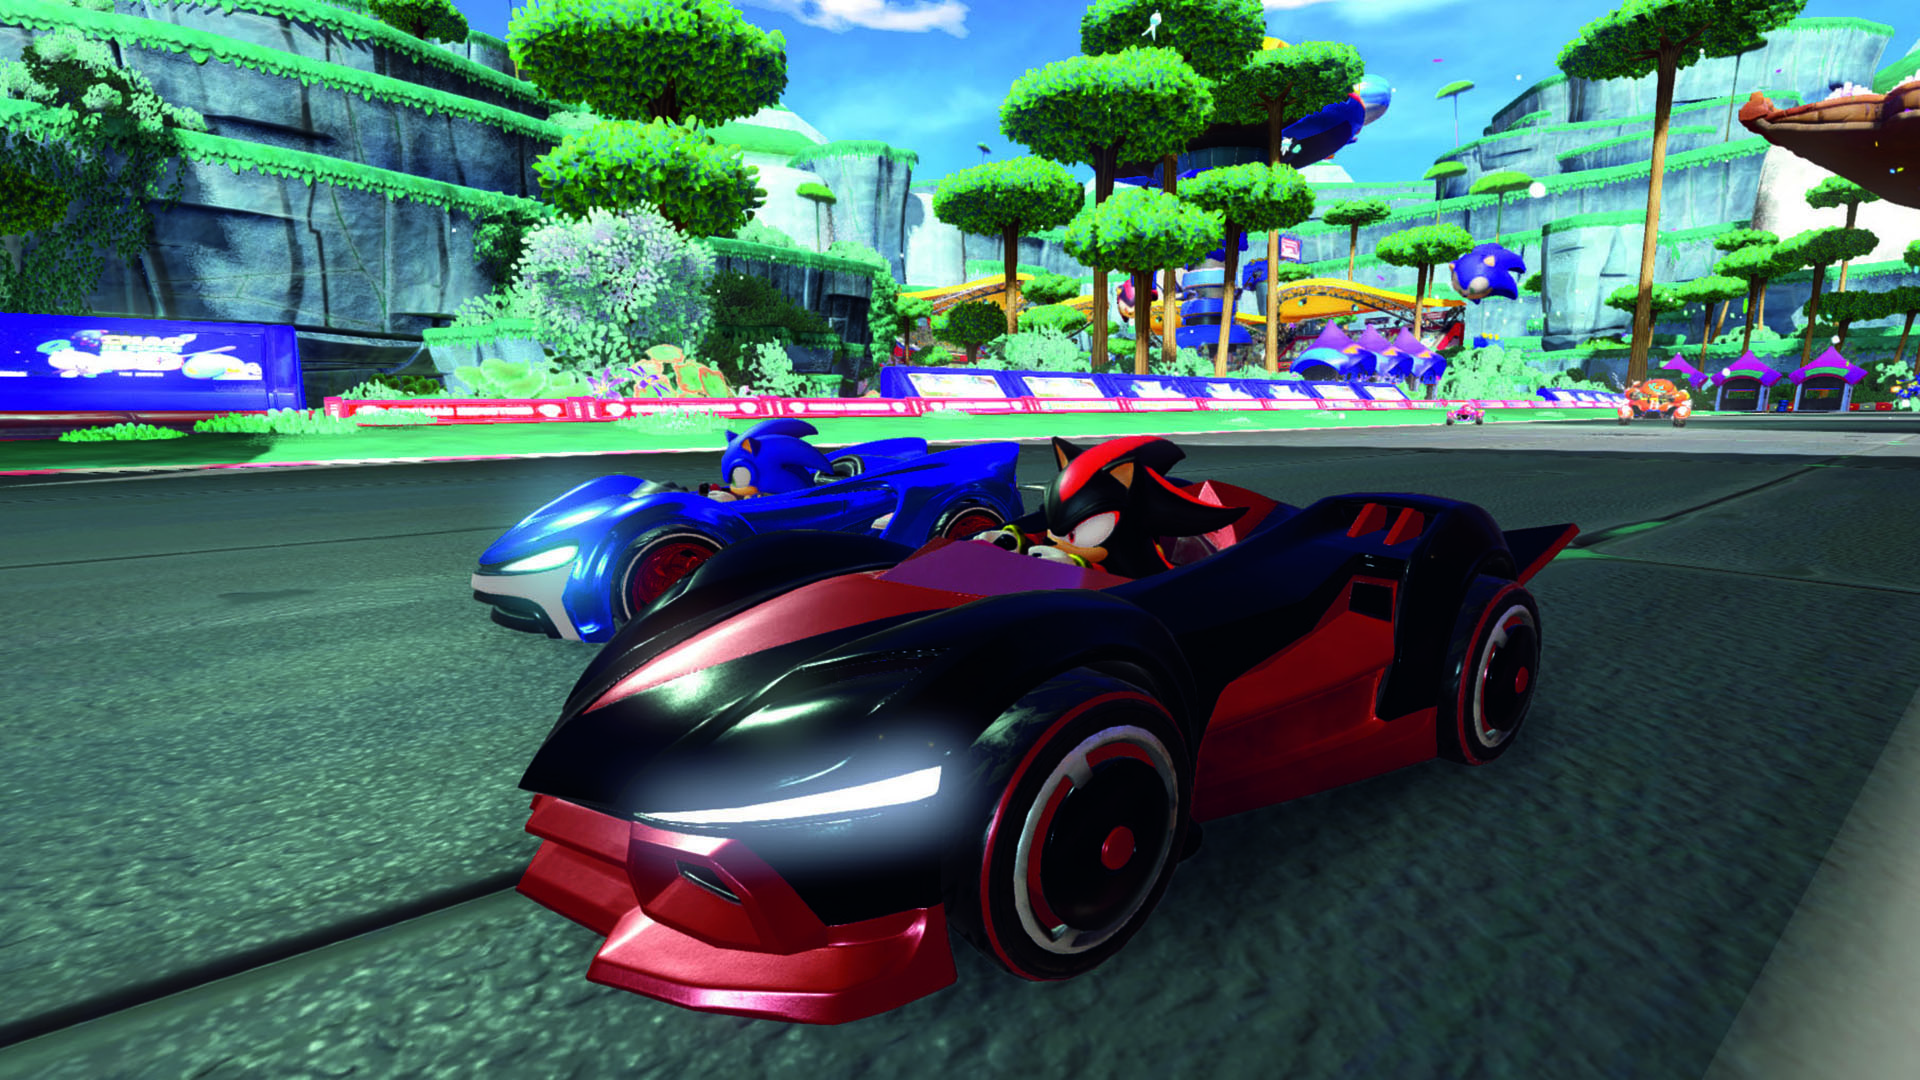 Team Sonic Racing aims to nudge Crash Team Racing off the track… by focusing on friendly play